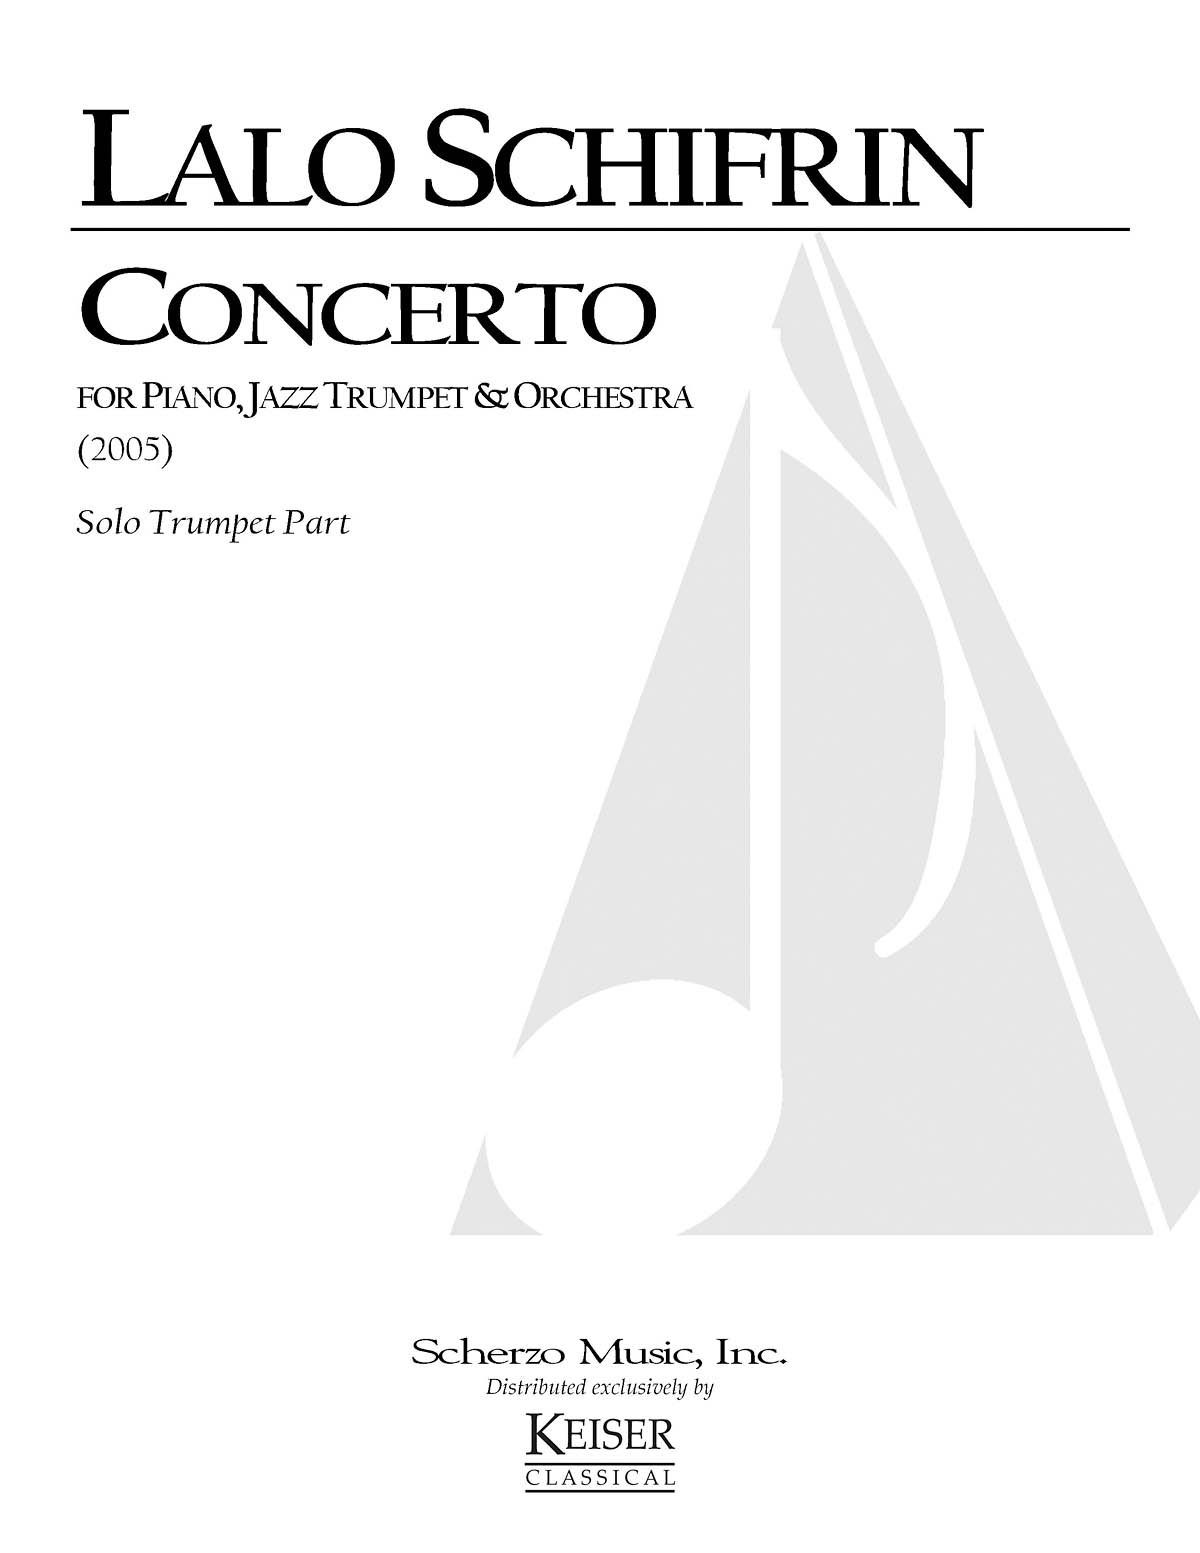 Concerto for Piano, Jazz Trumpet and Orchestra